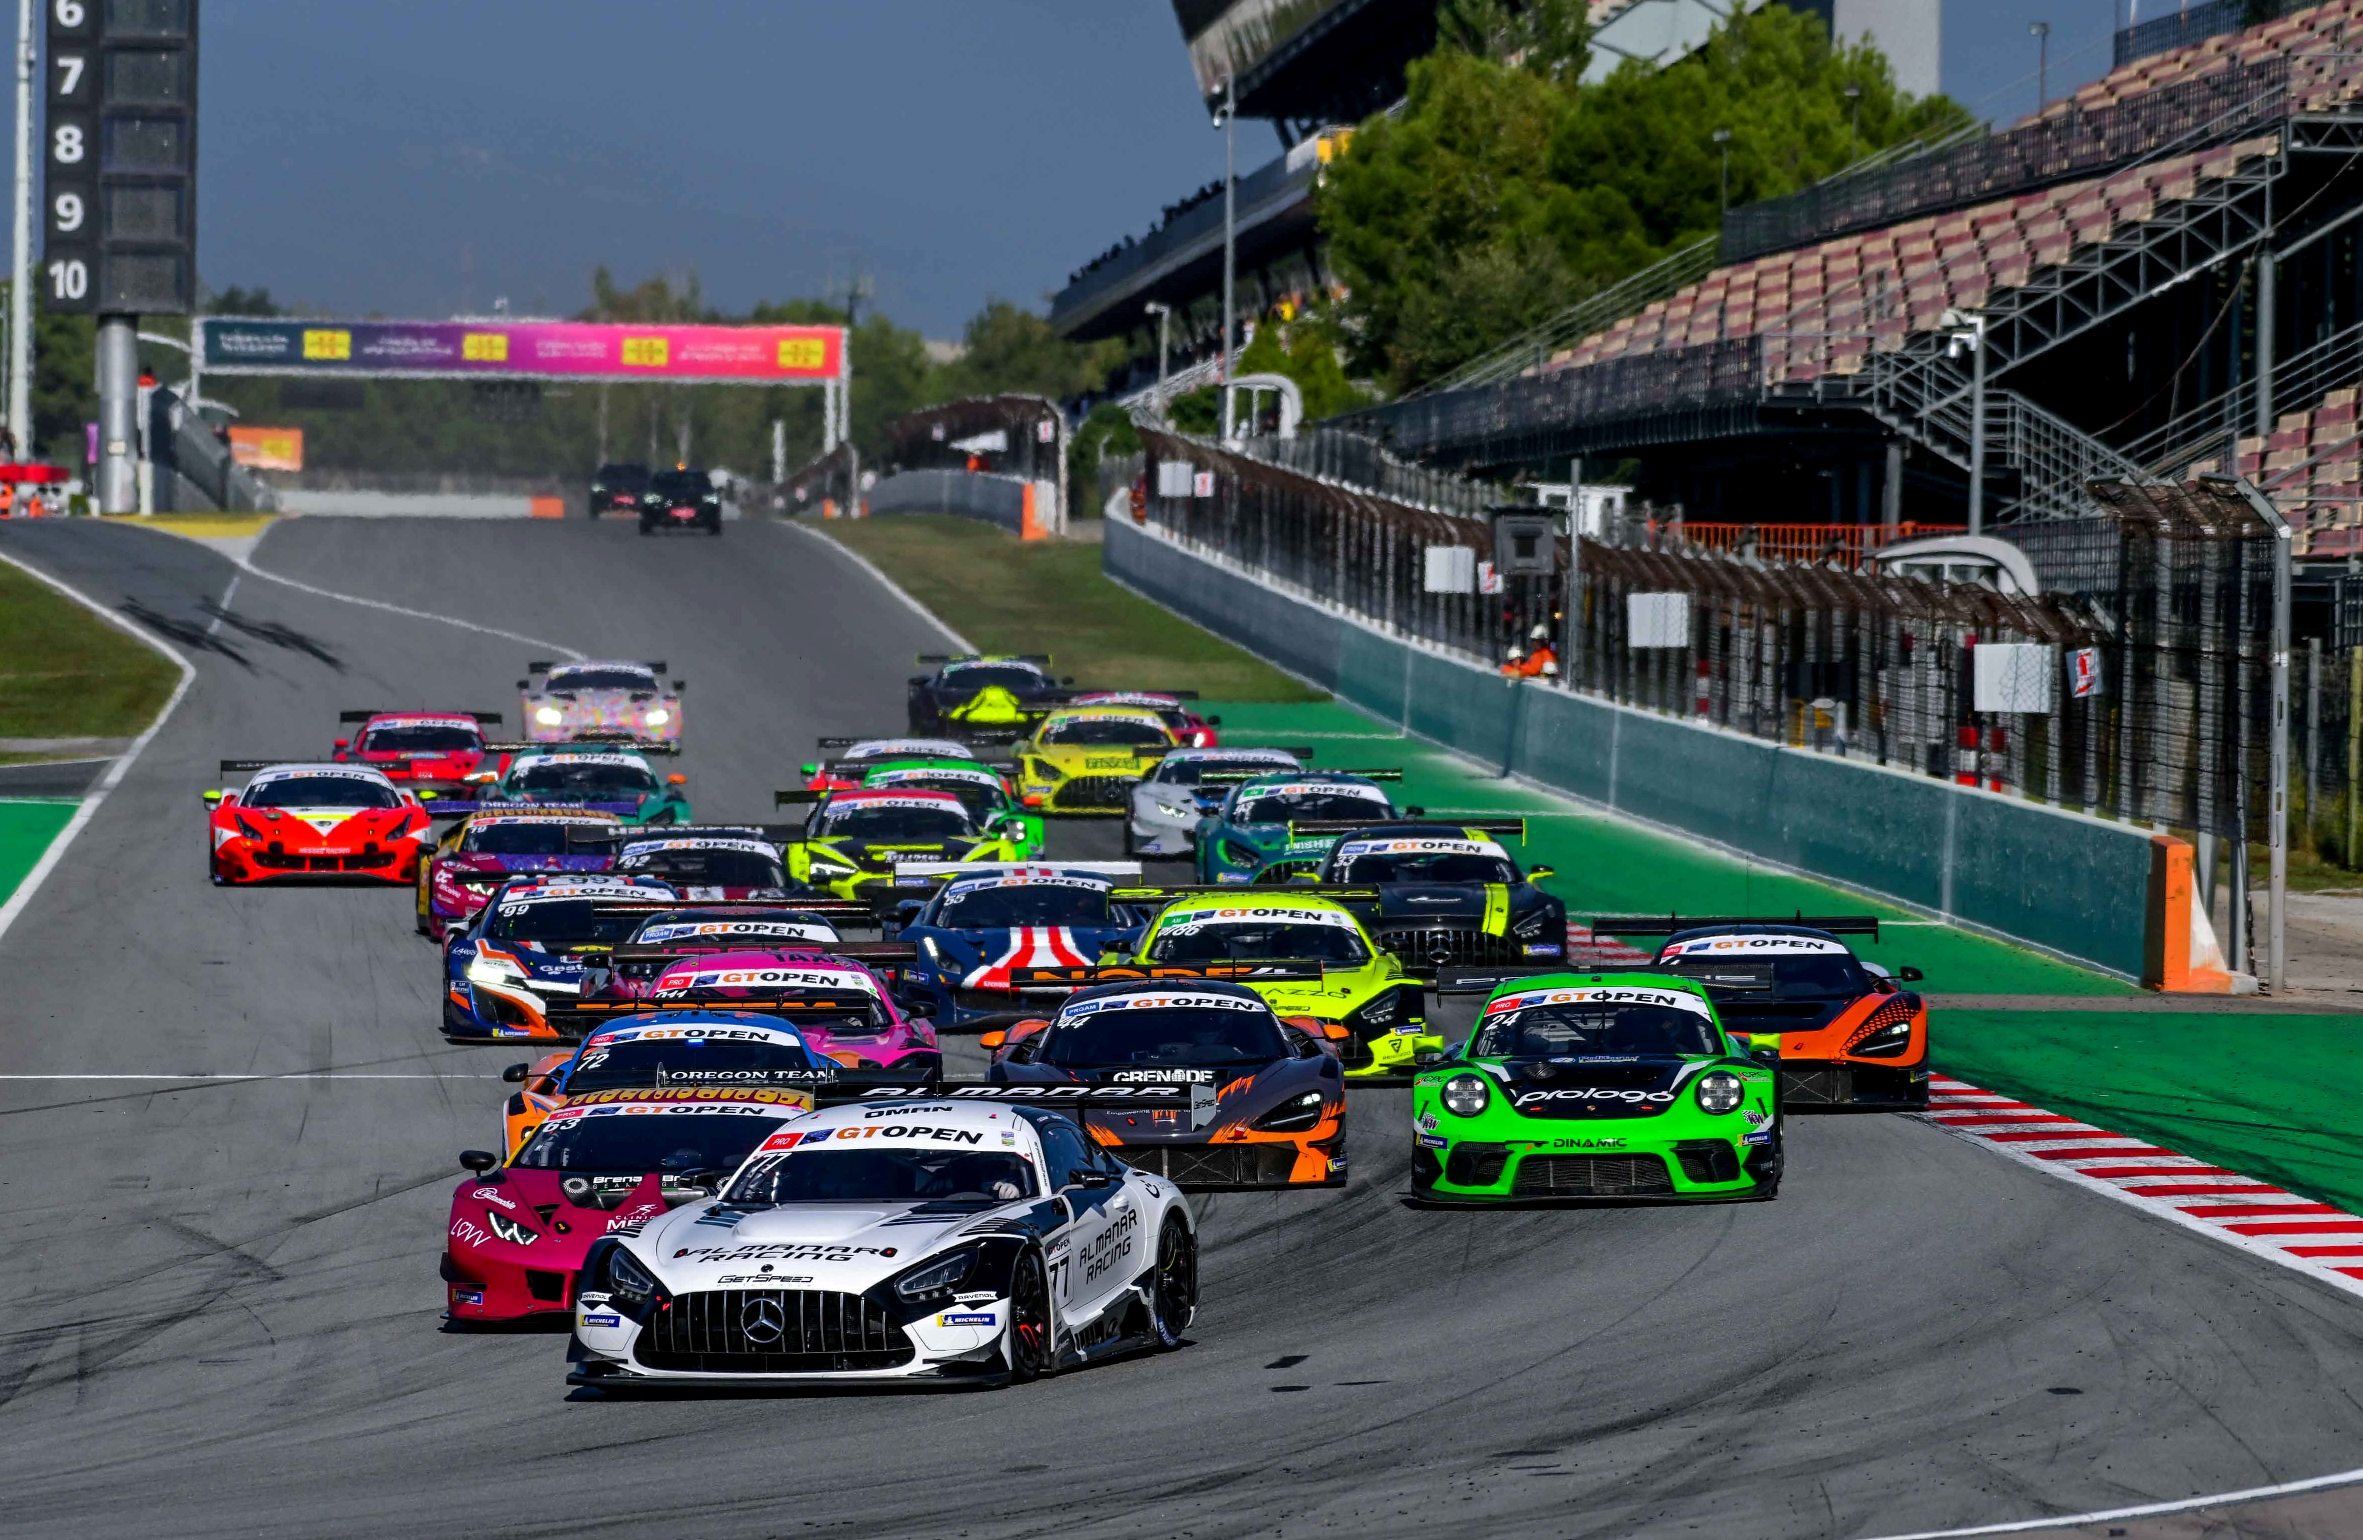 The International GT Open starts the 2023 season in style in Portugal